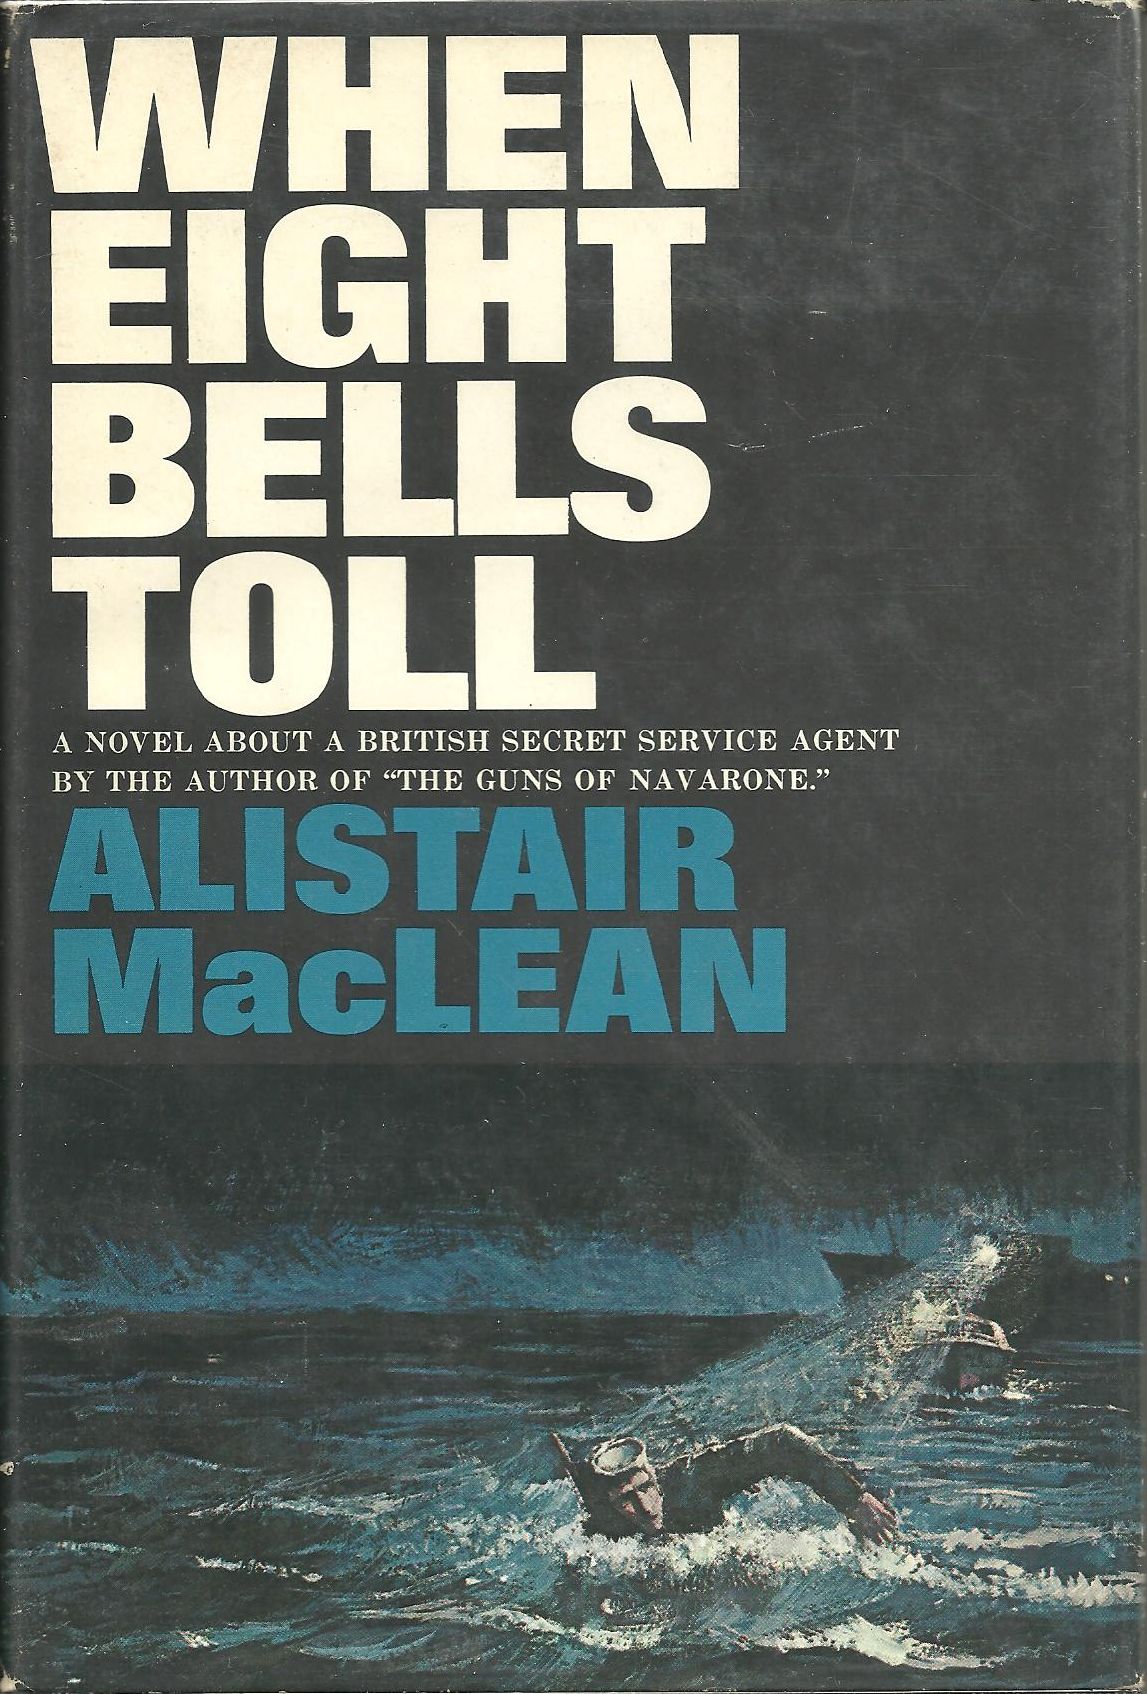 When Eight Bells Toll - US first edition